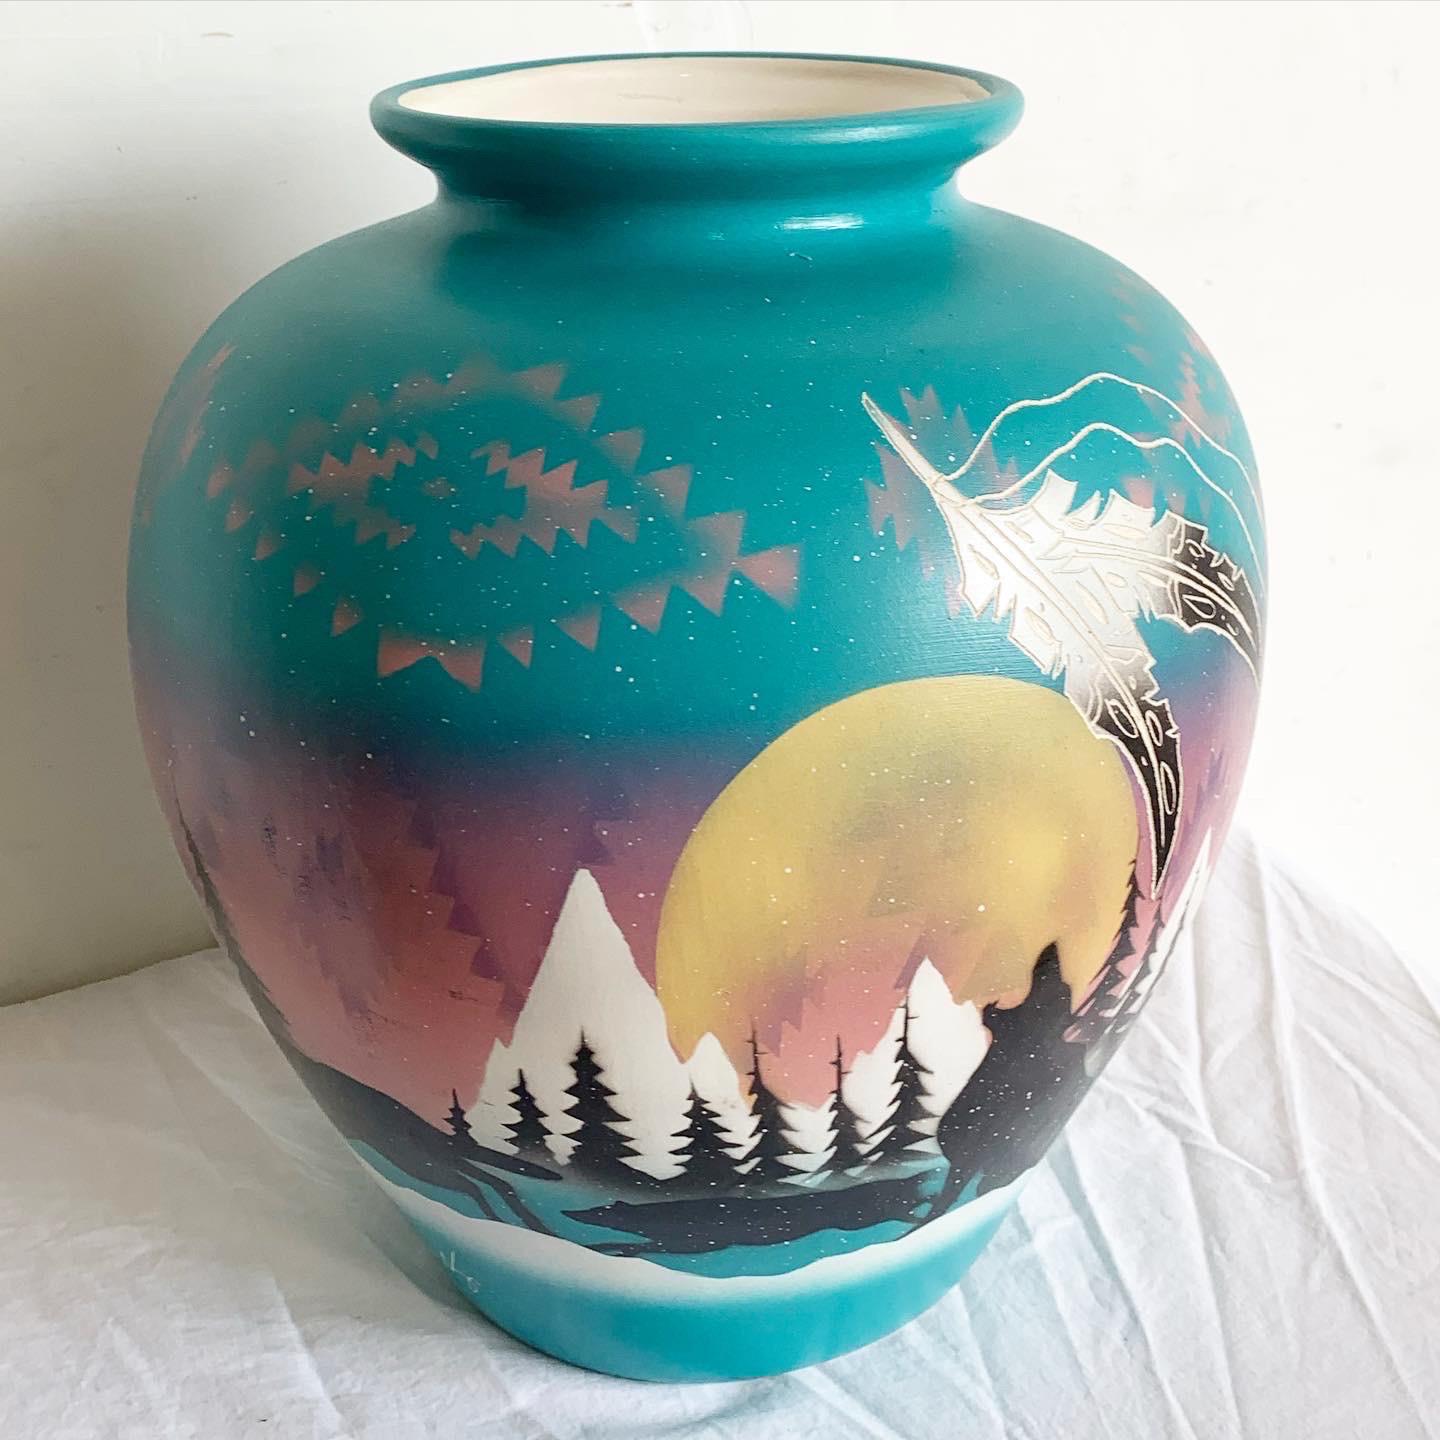 Dive into the artistry of the 1980s with this Southwest Pottery Vase. Hand-painted in a vibrant green hue, it showcases a lone wolf set against a moonlit mountain landscape. This depiction, merging nature and folklore, captures the essence of the